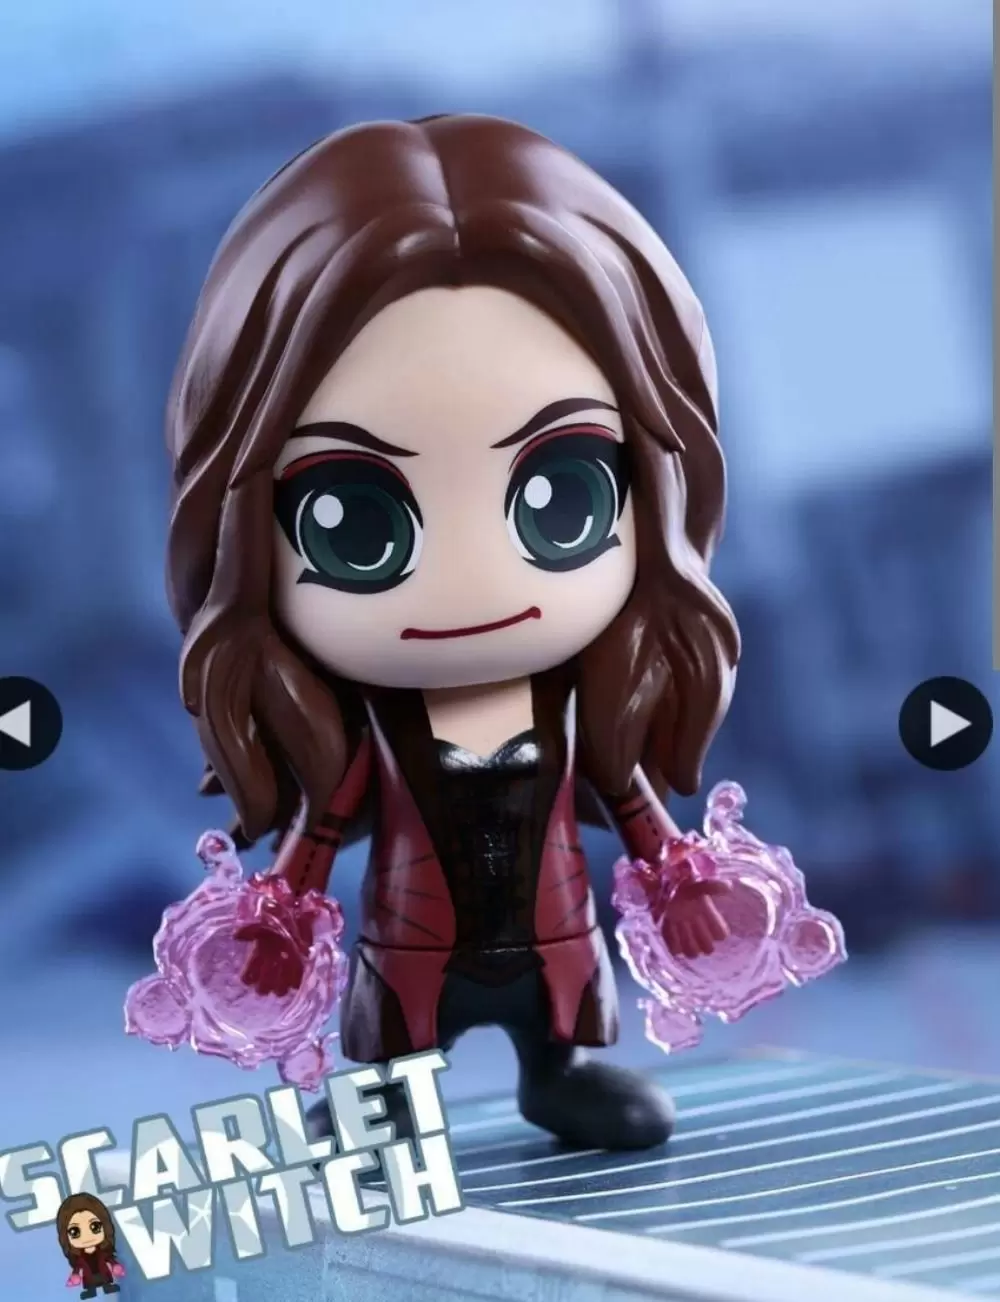 Cosbaby Figures - Scarlet Witch